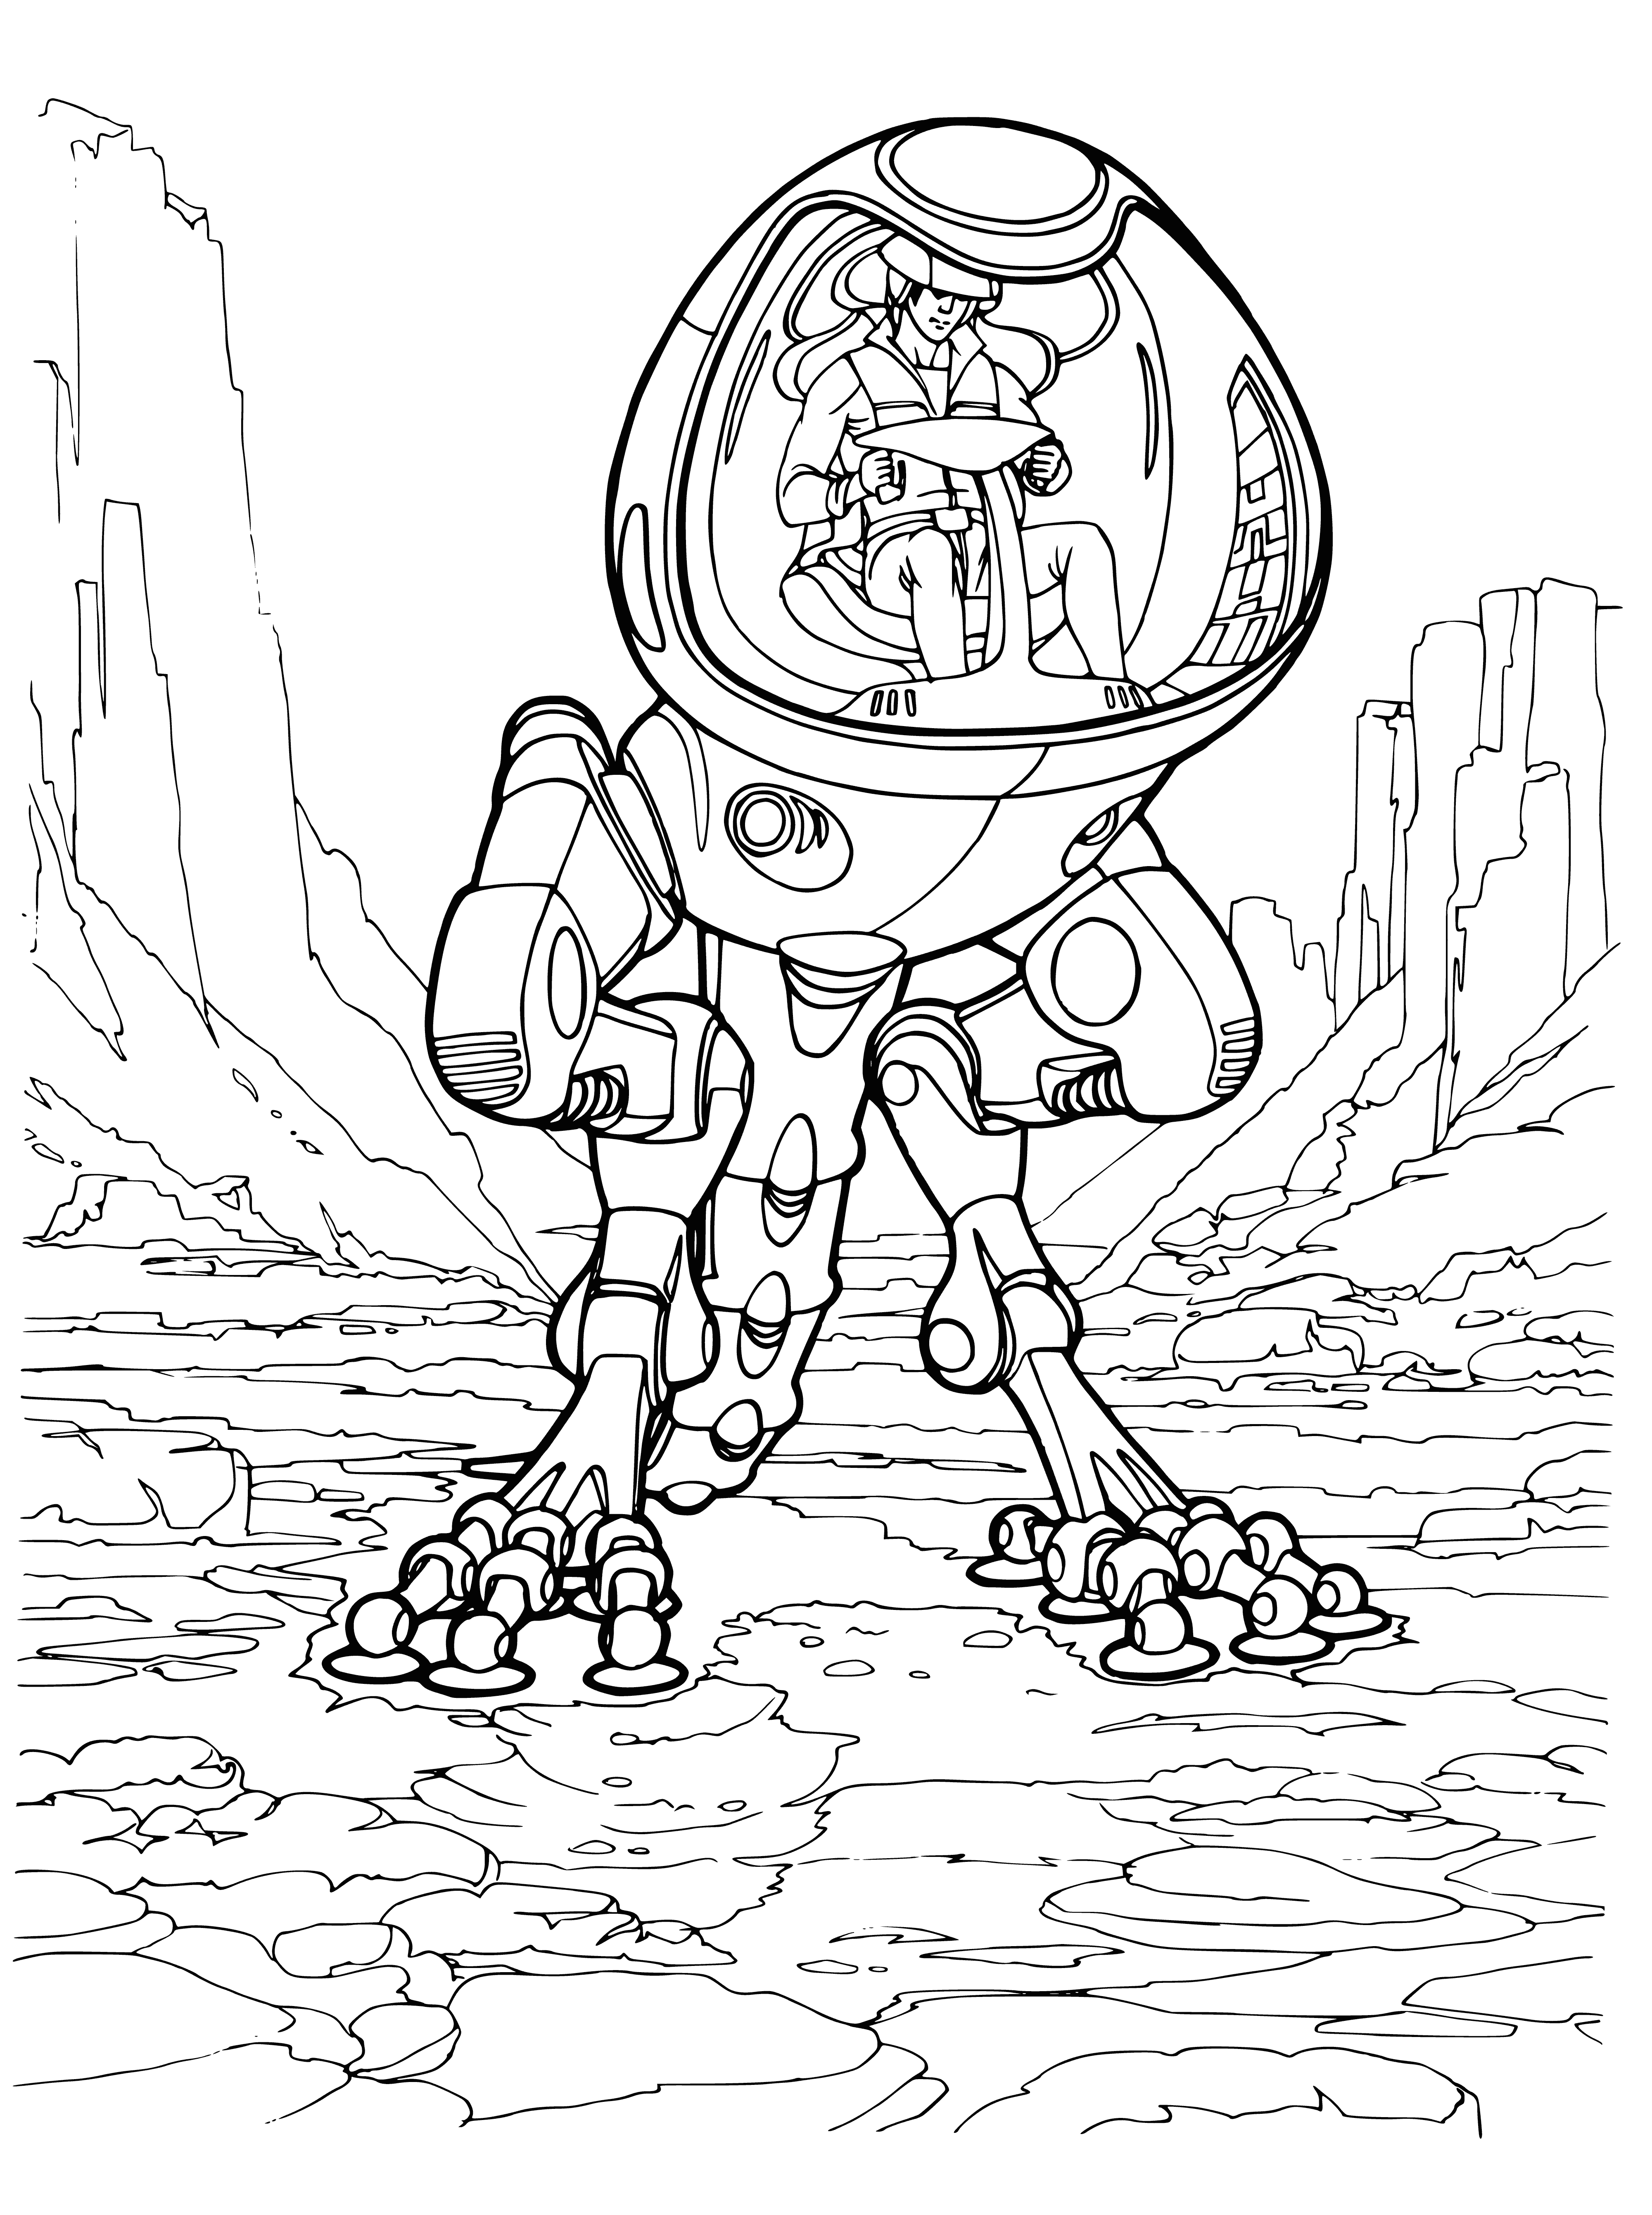 Two-legged walker coloring page